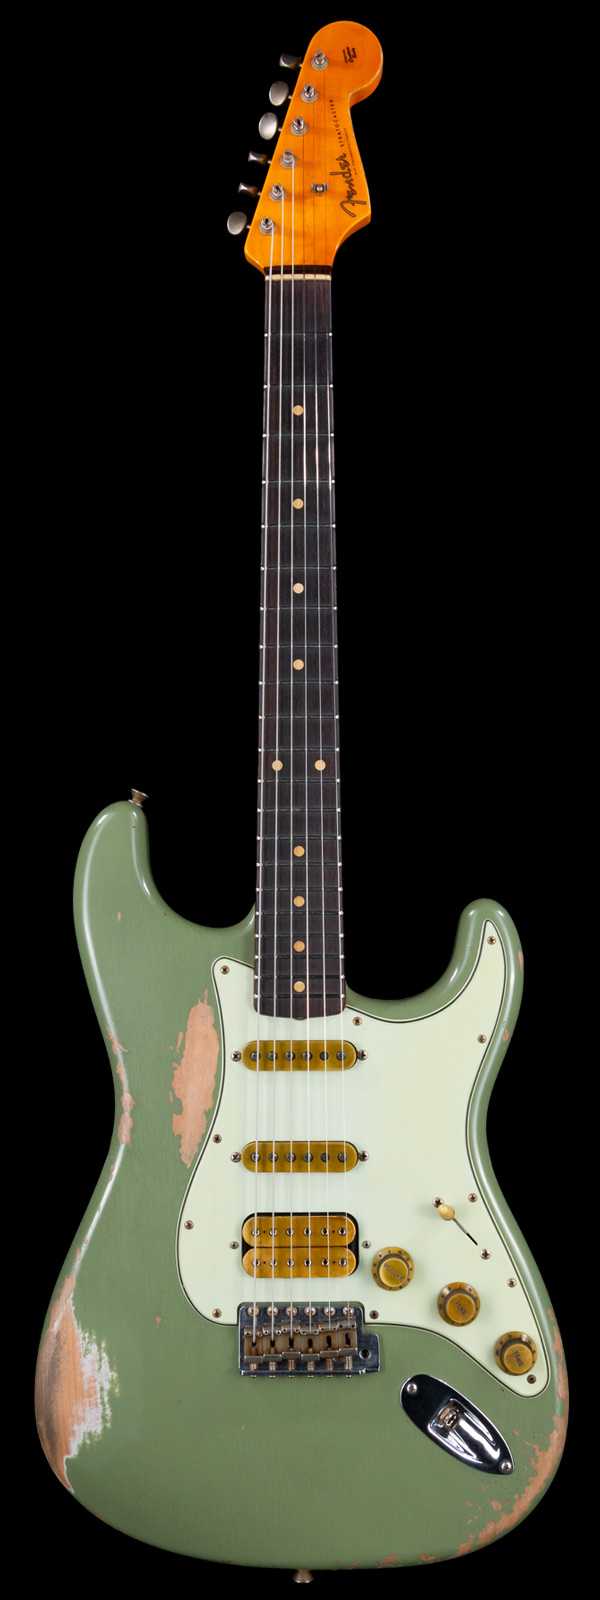 Fender Custom Shop Alley Cat 2.0 Stratocaster Heavy Relic HSS Rosewood Board Vintage Trem Faded Drab Green